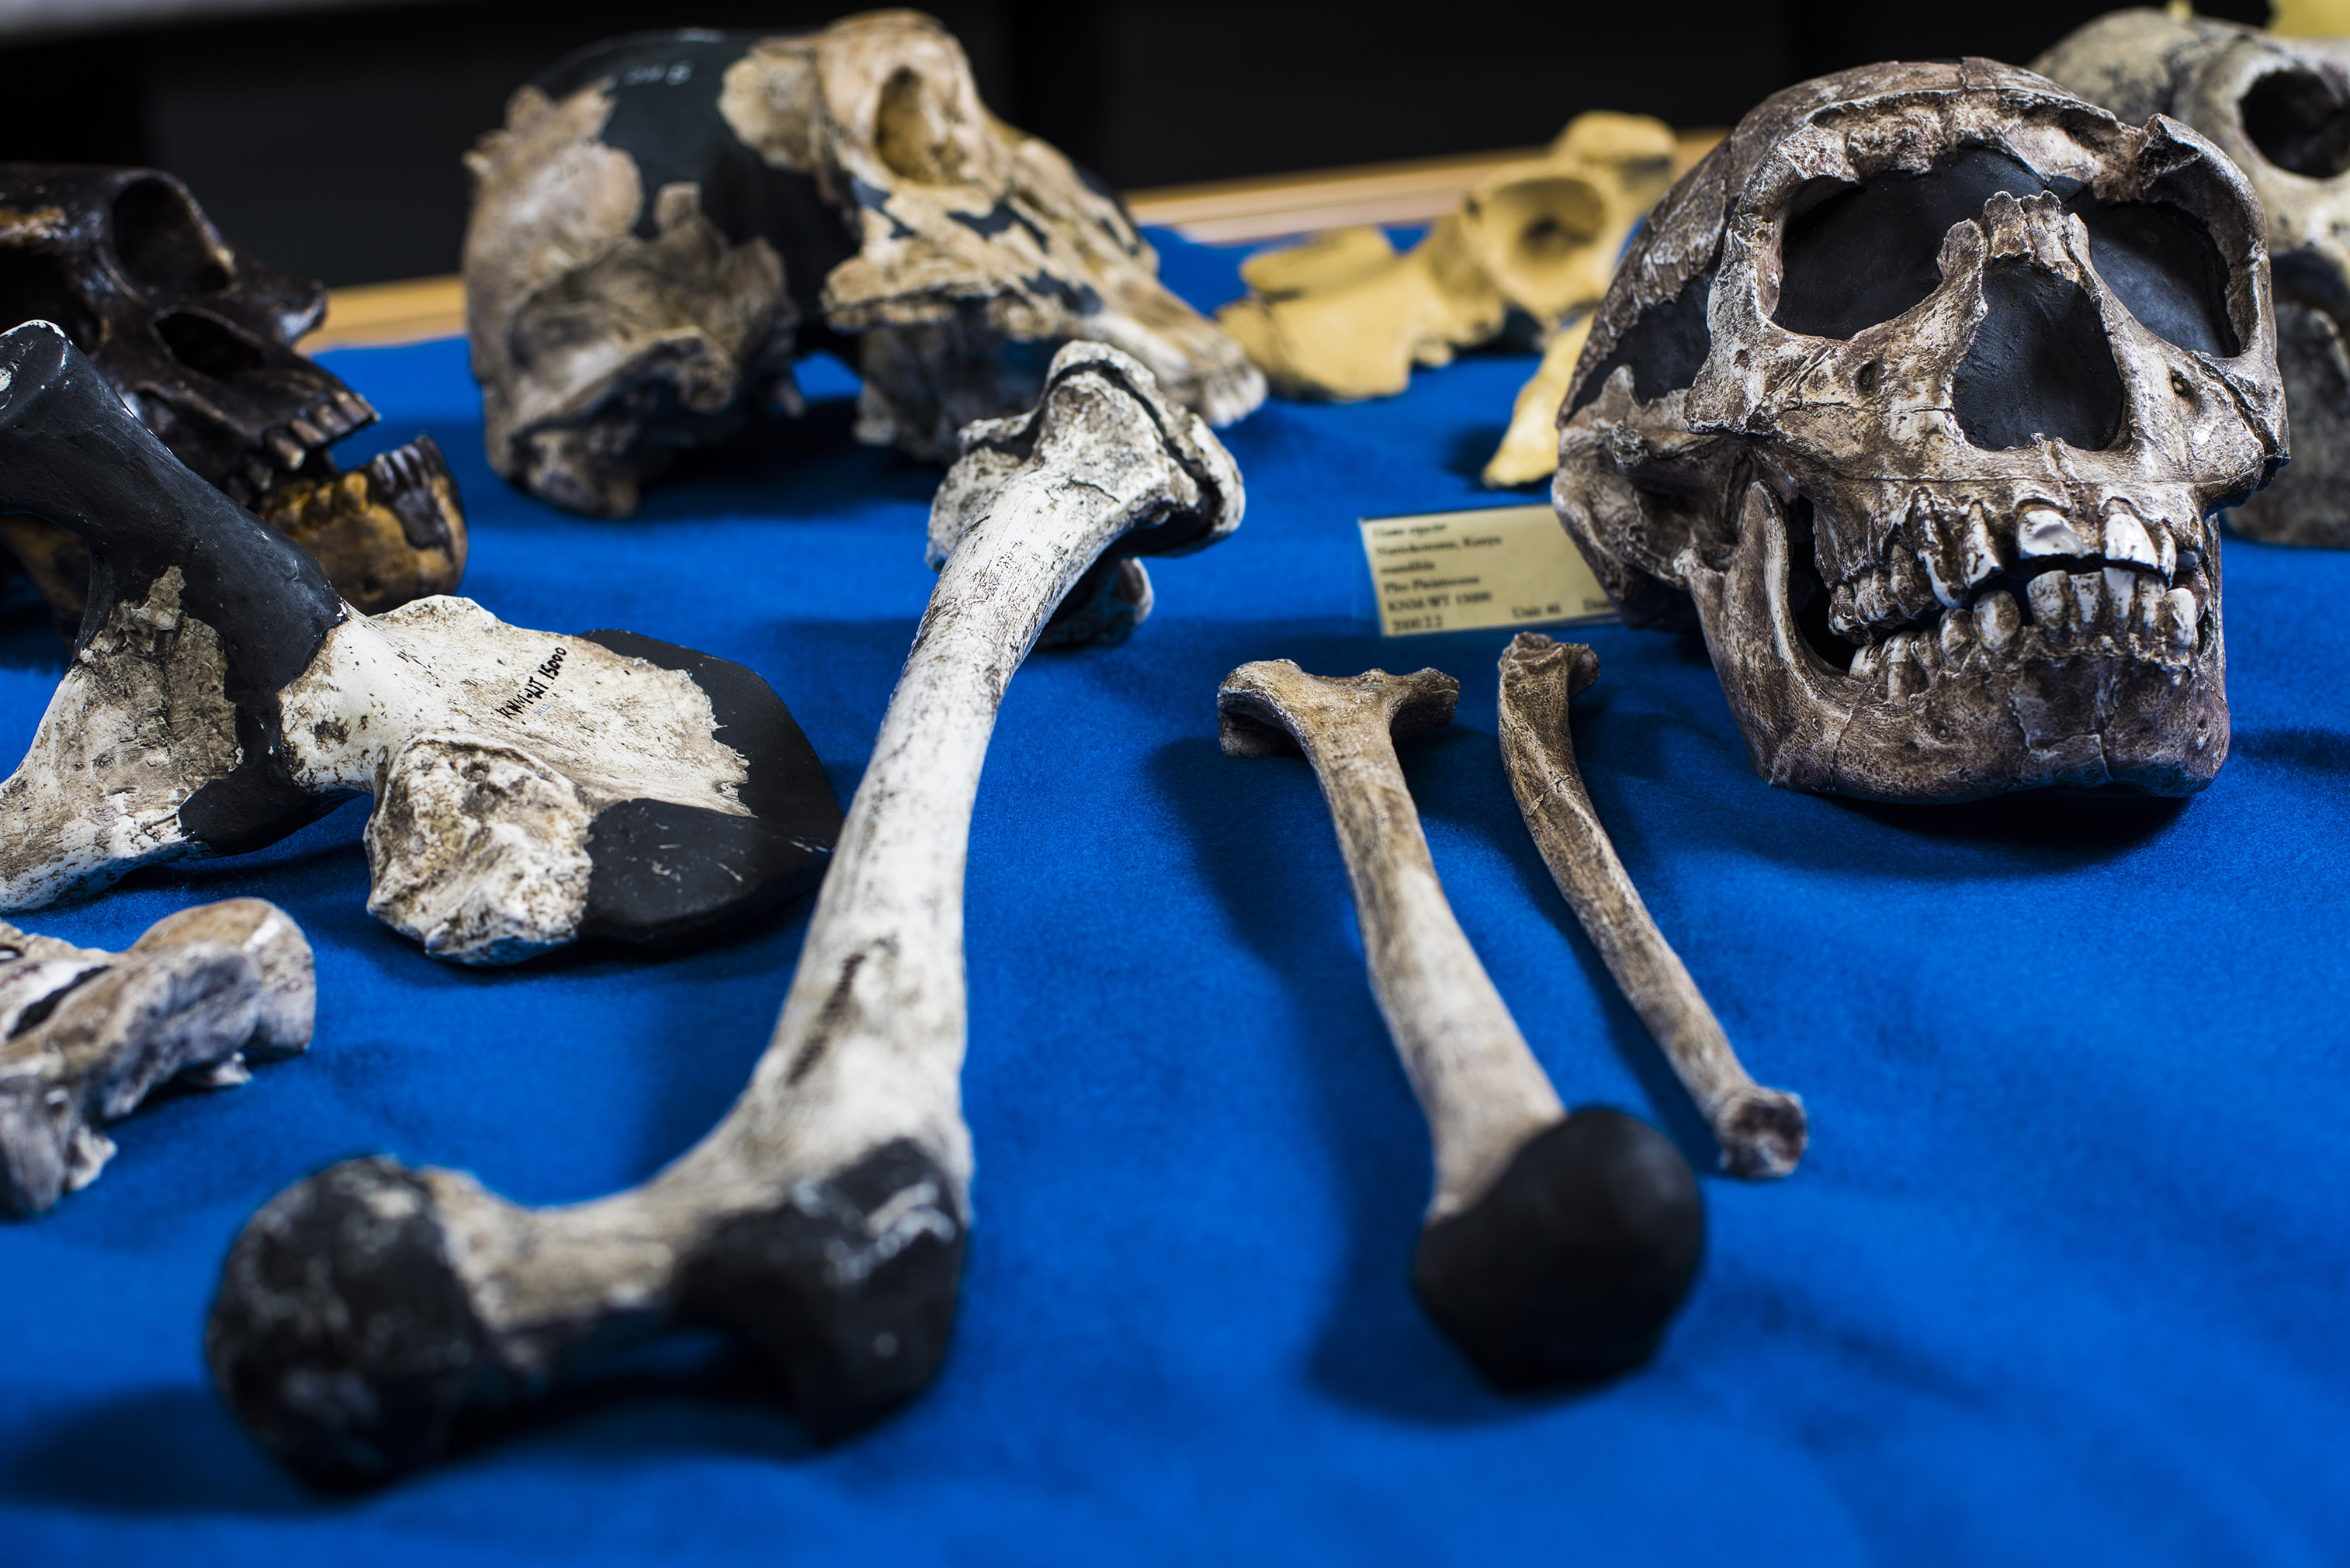 Casts of hominid bones and skulls displayed on a royal blue table.